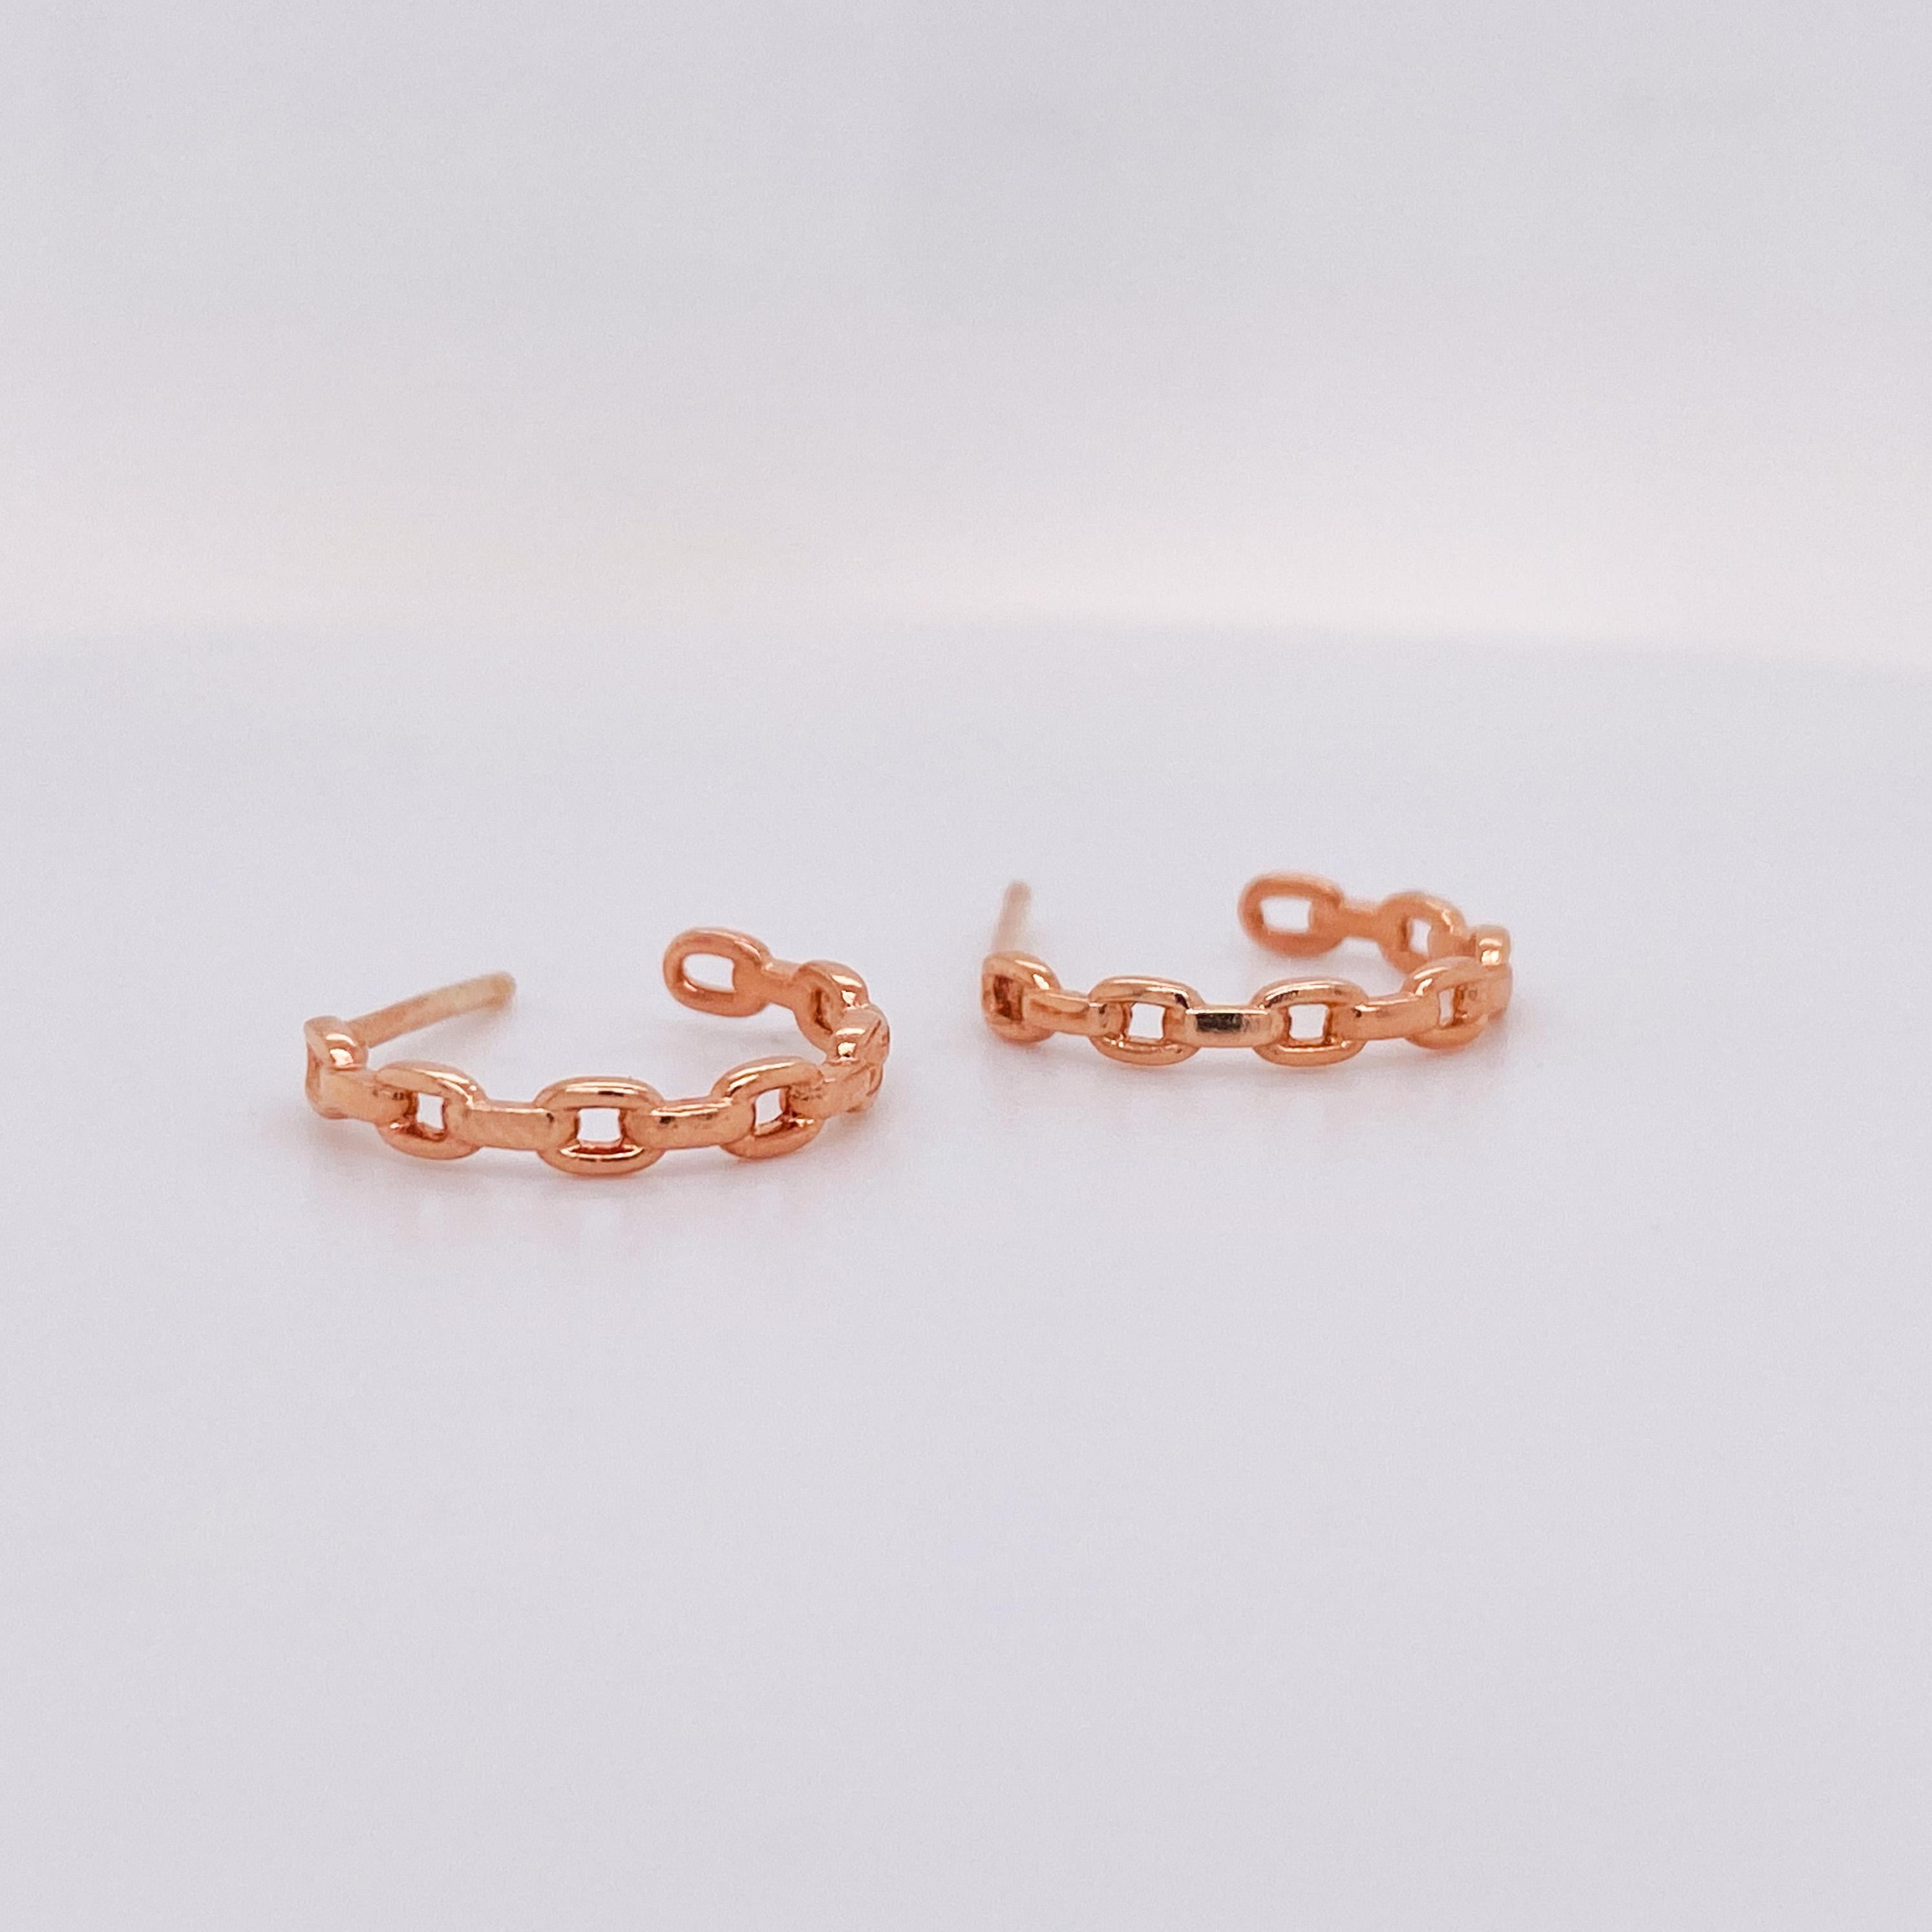 Cable Link Hoop Earrings Sleek 15 mm Diameter by 2.3 mm in 14K Rose Gold LV  In New Condition For Sale In Austin, TX